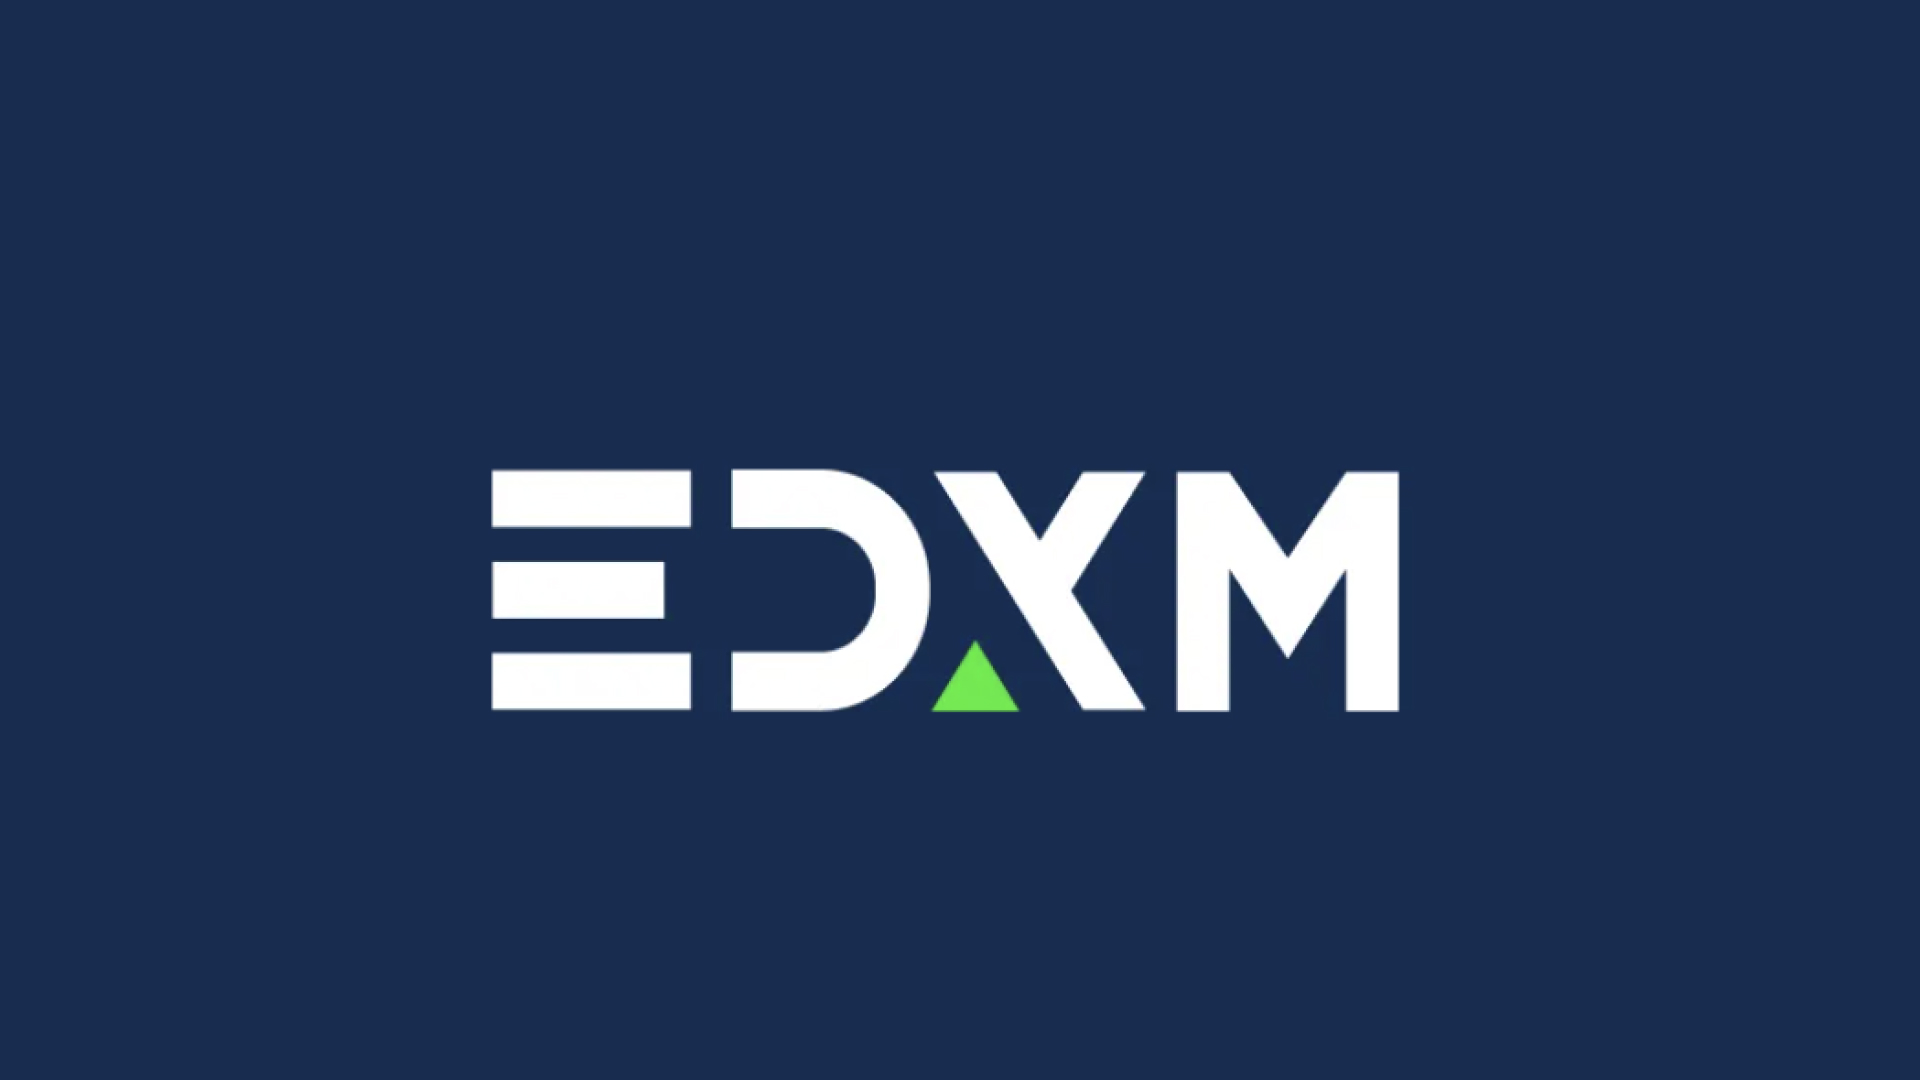 Wall Street Backed ‘EDX Markets’ Crypto Exchange Goes Live